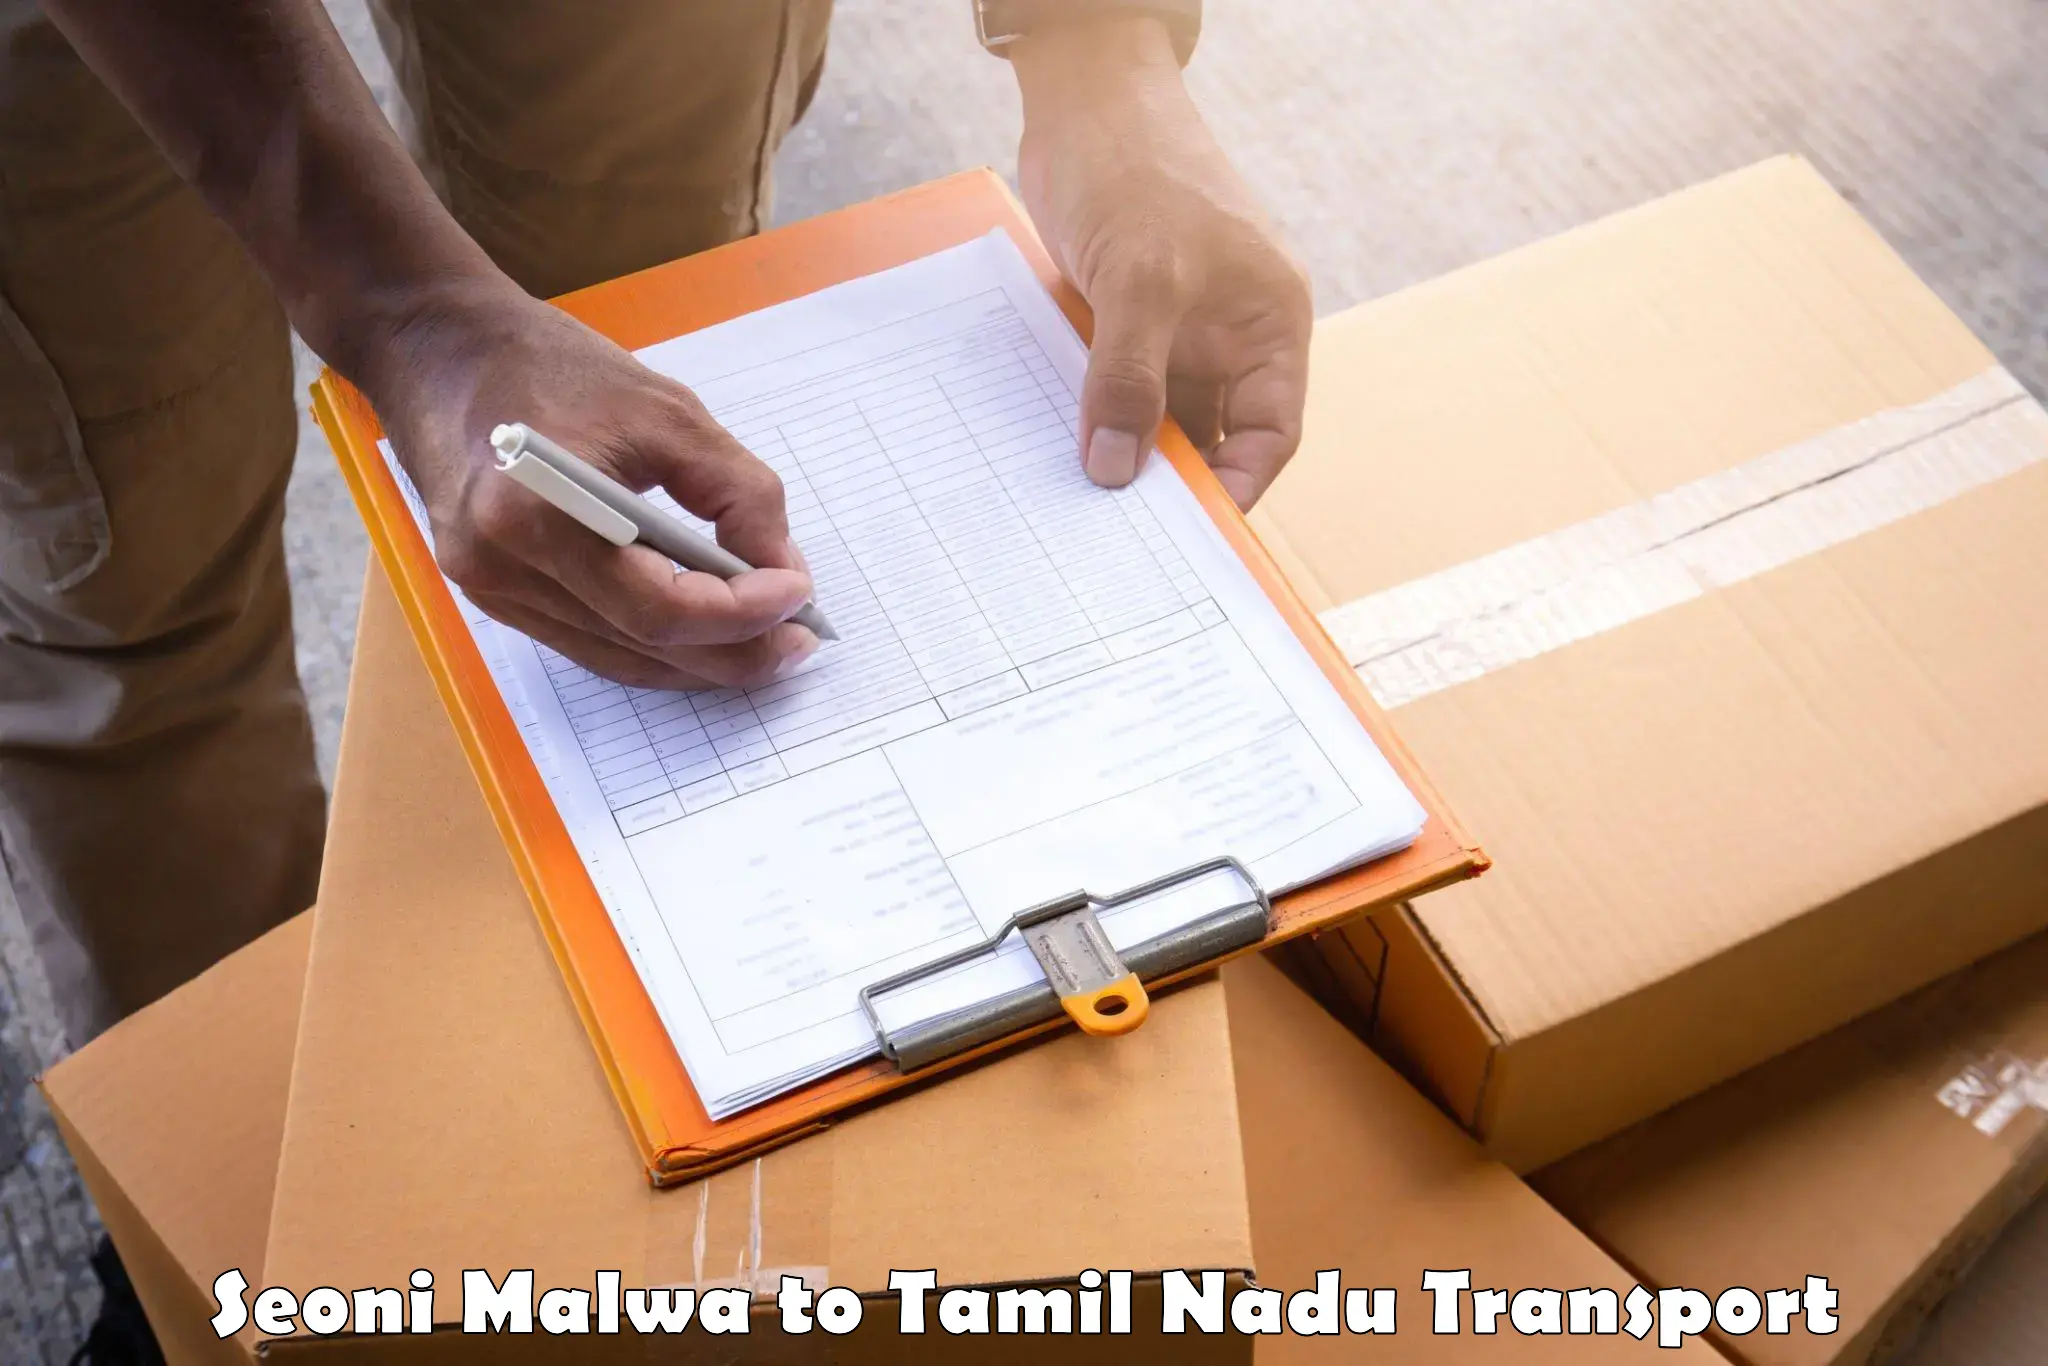 Pick up transport service Seoni Malwa to SRM Institute of Science and Technology Chennai